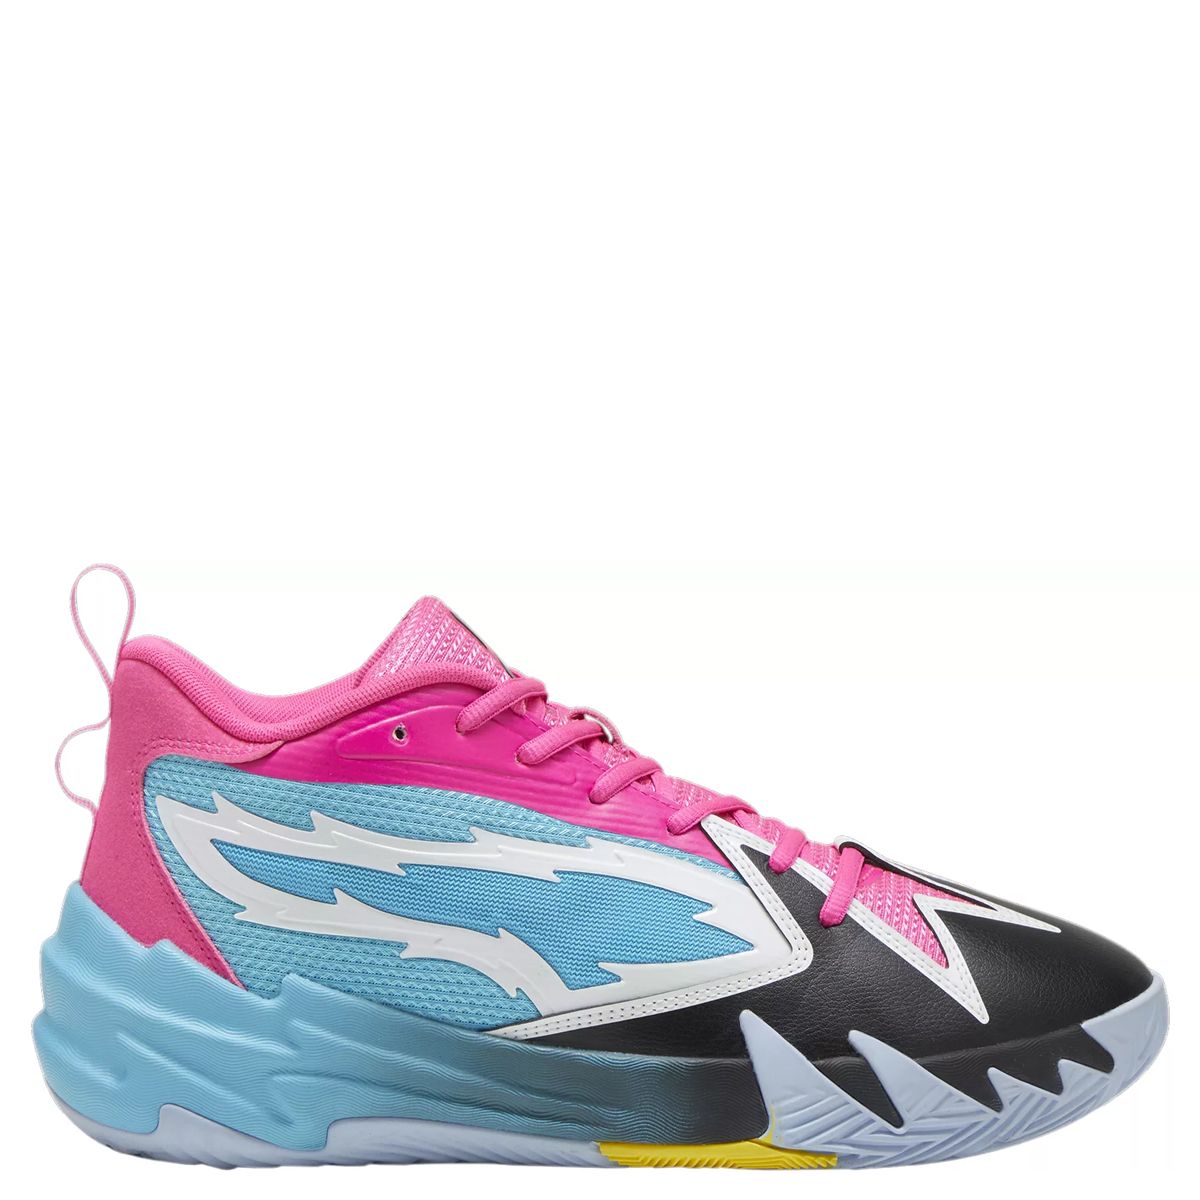 Image of Puma Men's/Women's 1 Northern Lights Basketball Shoes